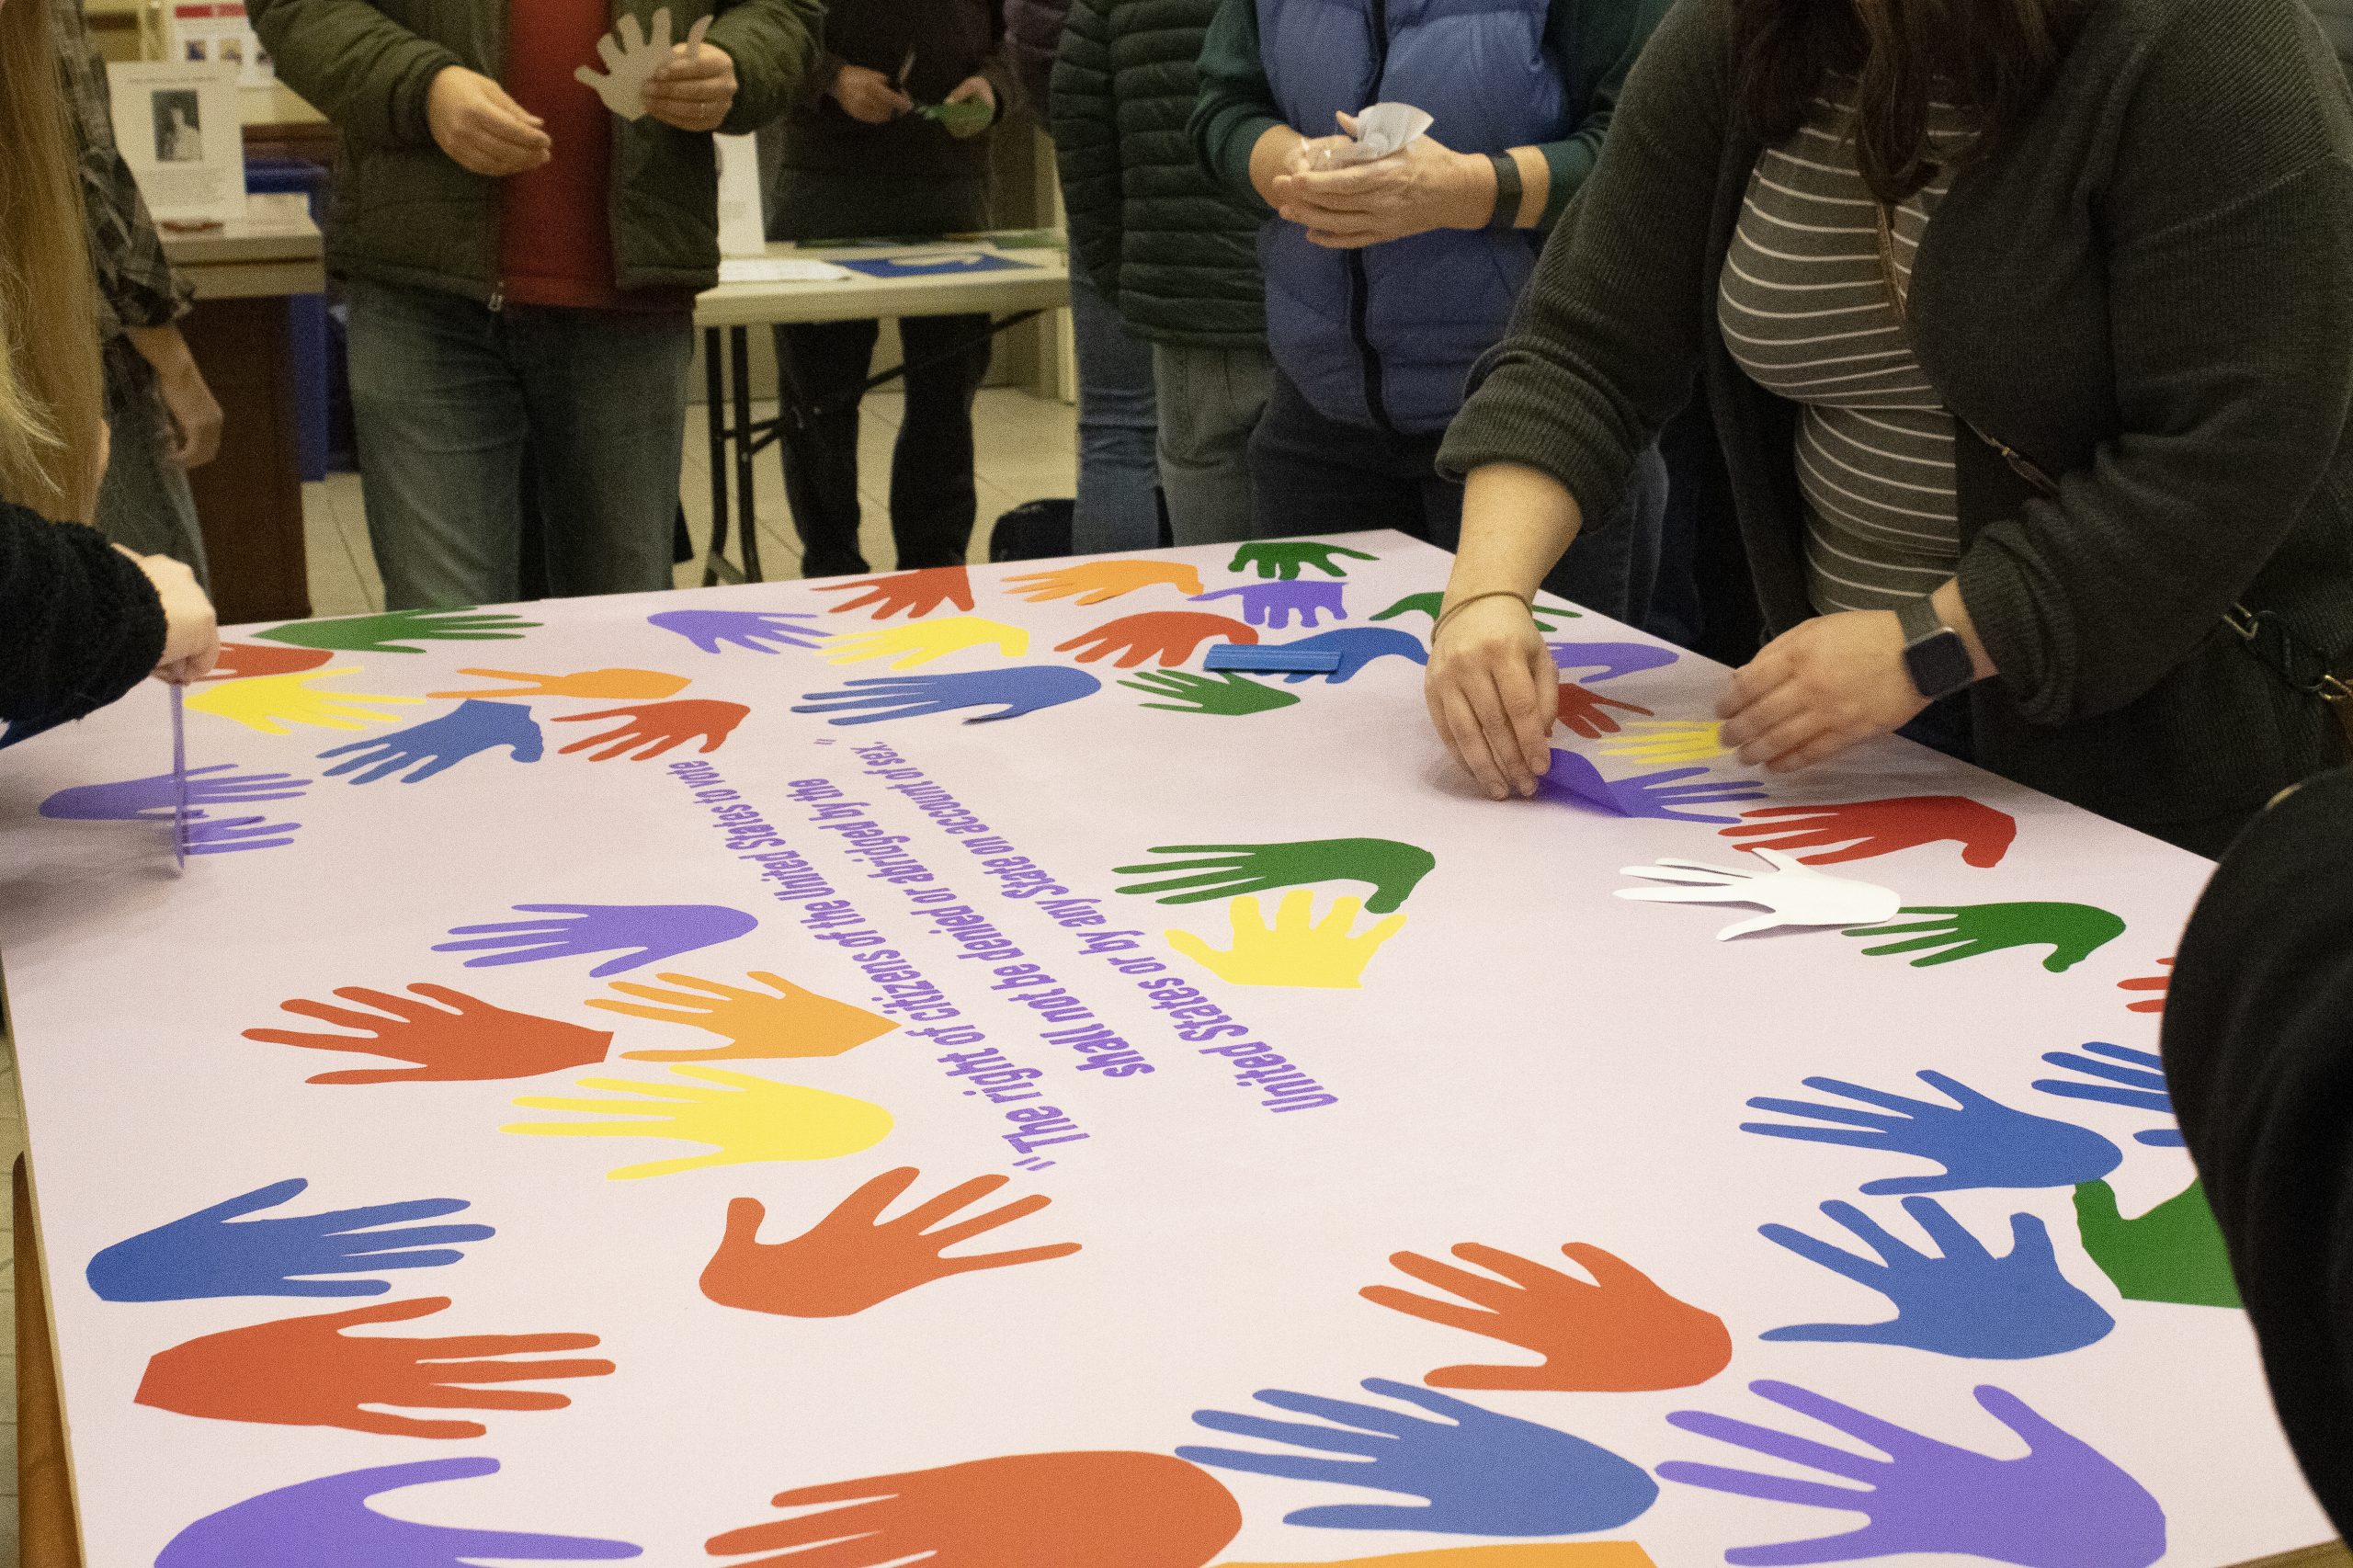 Students and faculty collaborate to create a mural commemorating the anniversary of the 19th amendment to be displayed in Hamersly Library.